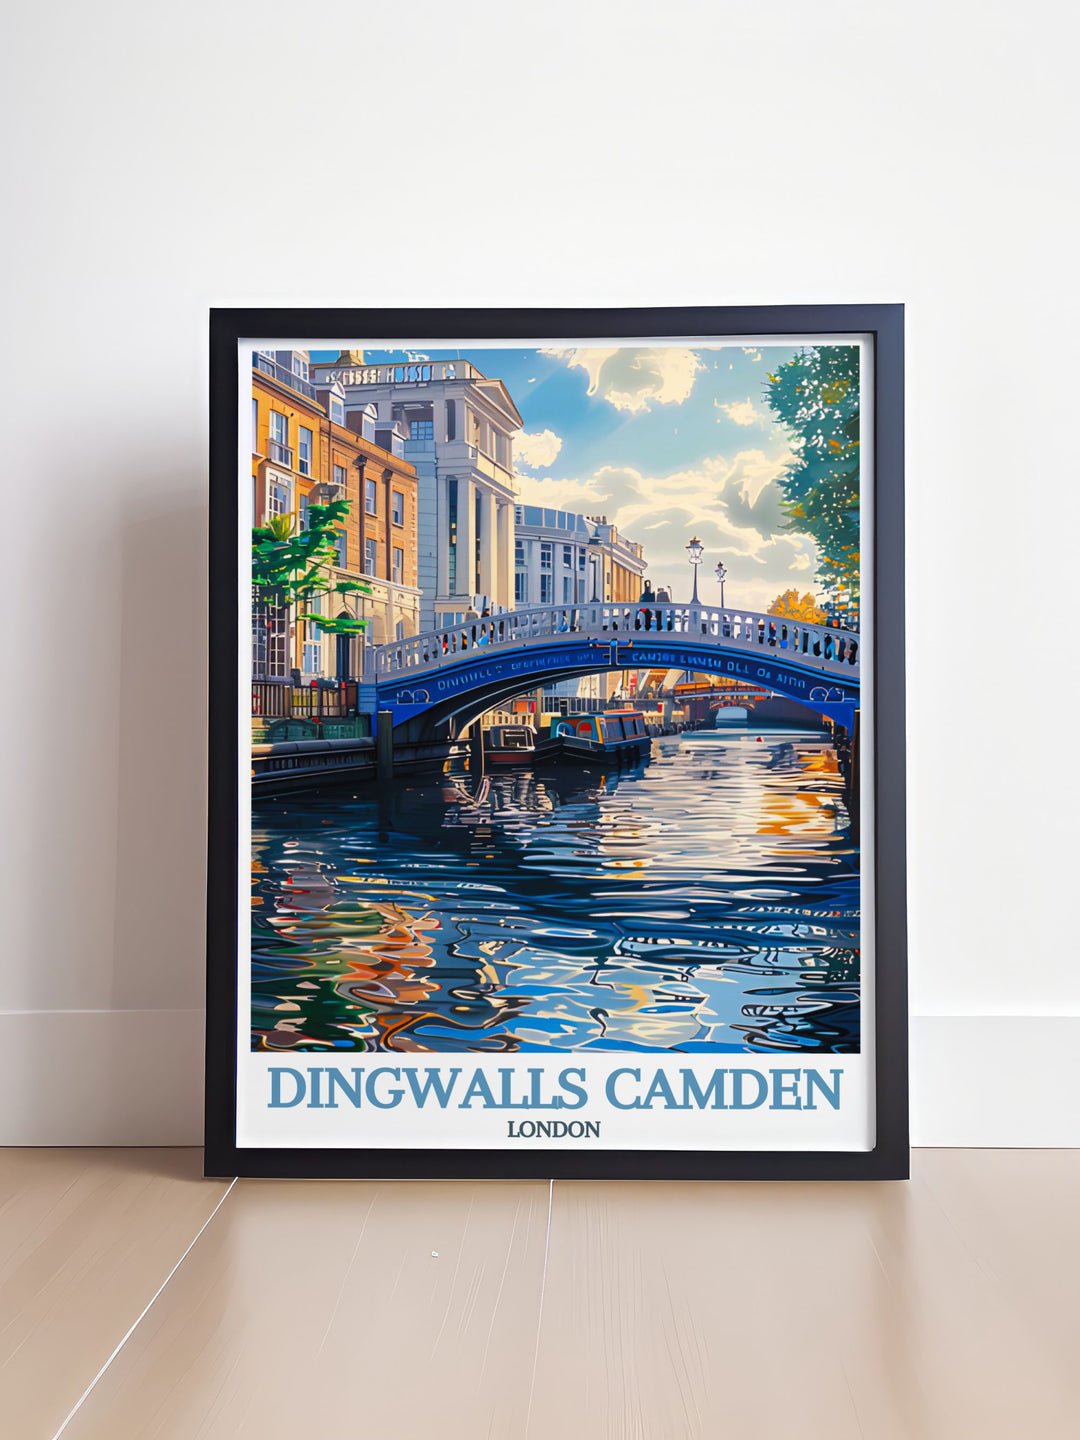 Featuring the historic Camden Lock Bridge, this art print showcases its industrial heritage and architectural beauty, making it an ideal piece for fans of Londons history.